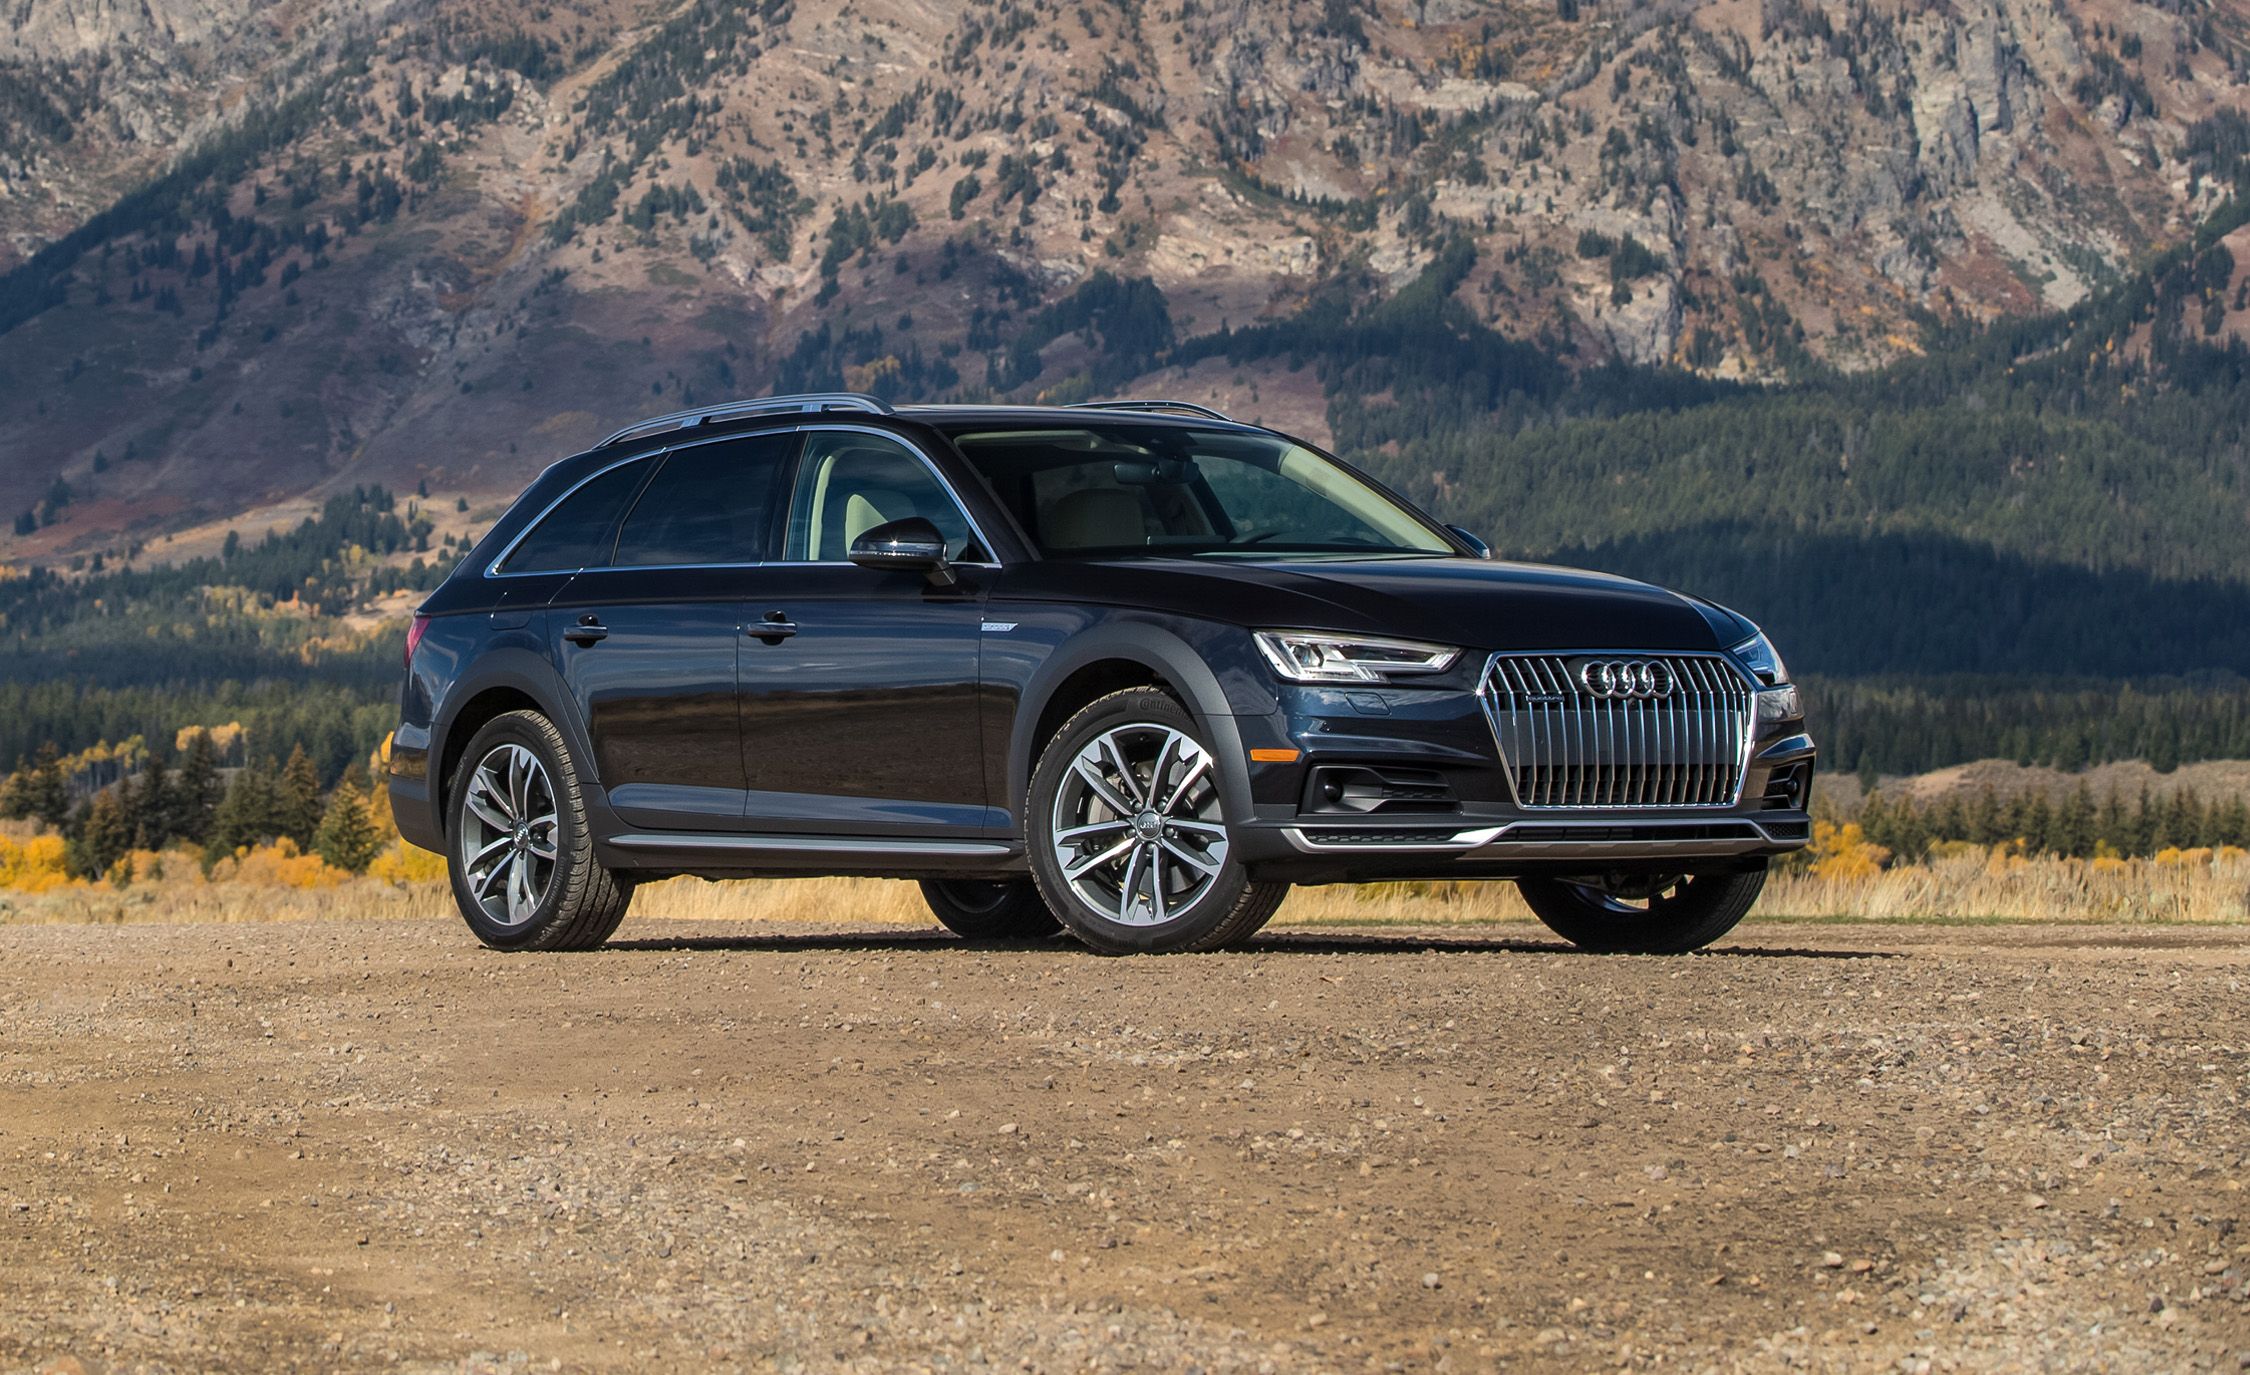 2018 Audi A4 Allroad Review, Pricing, and Specs